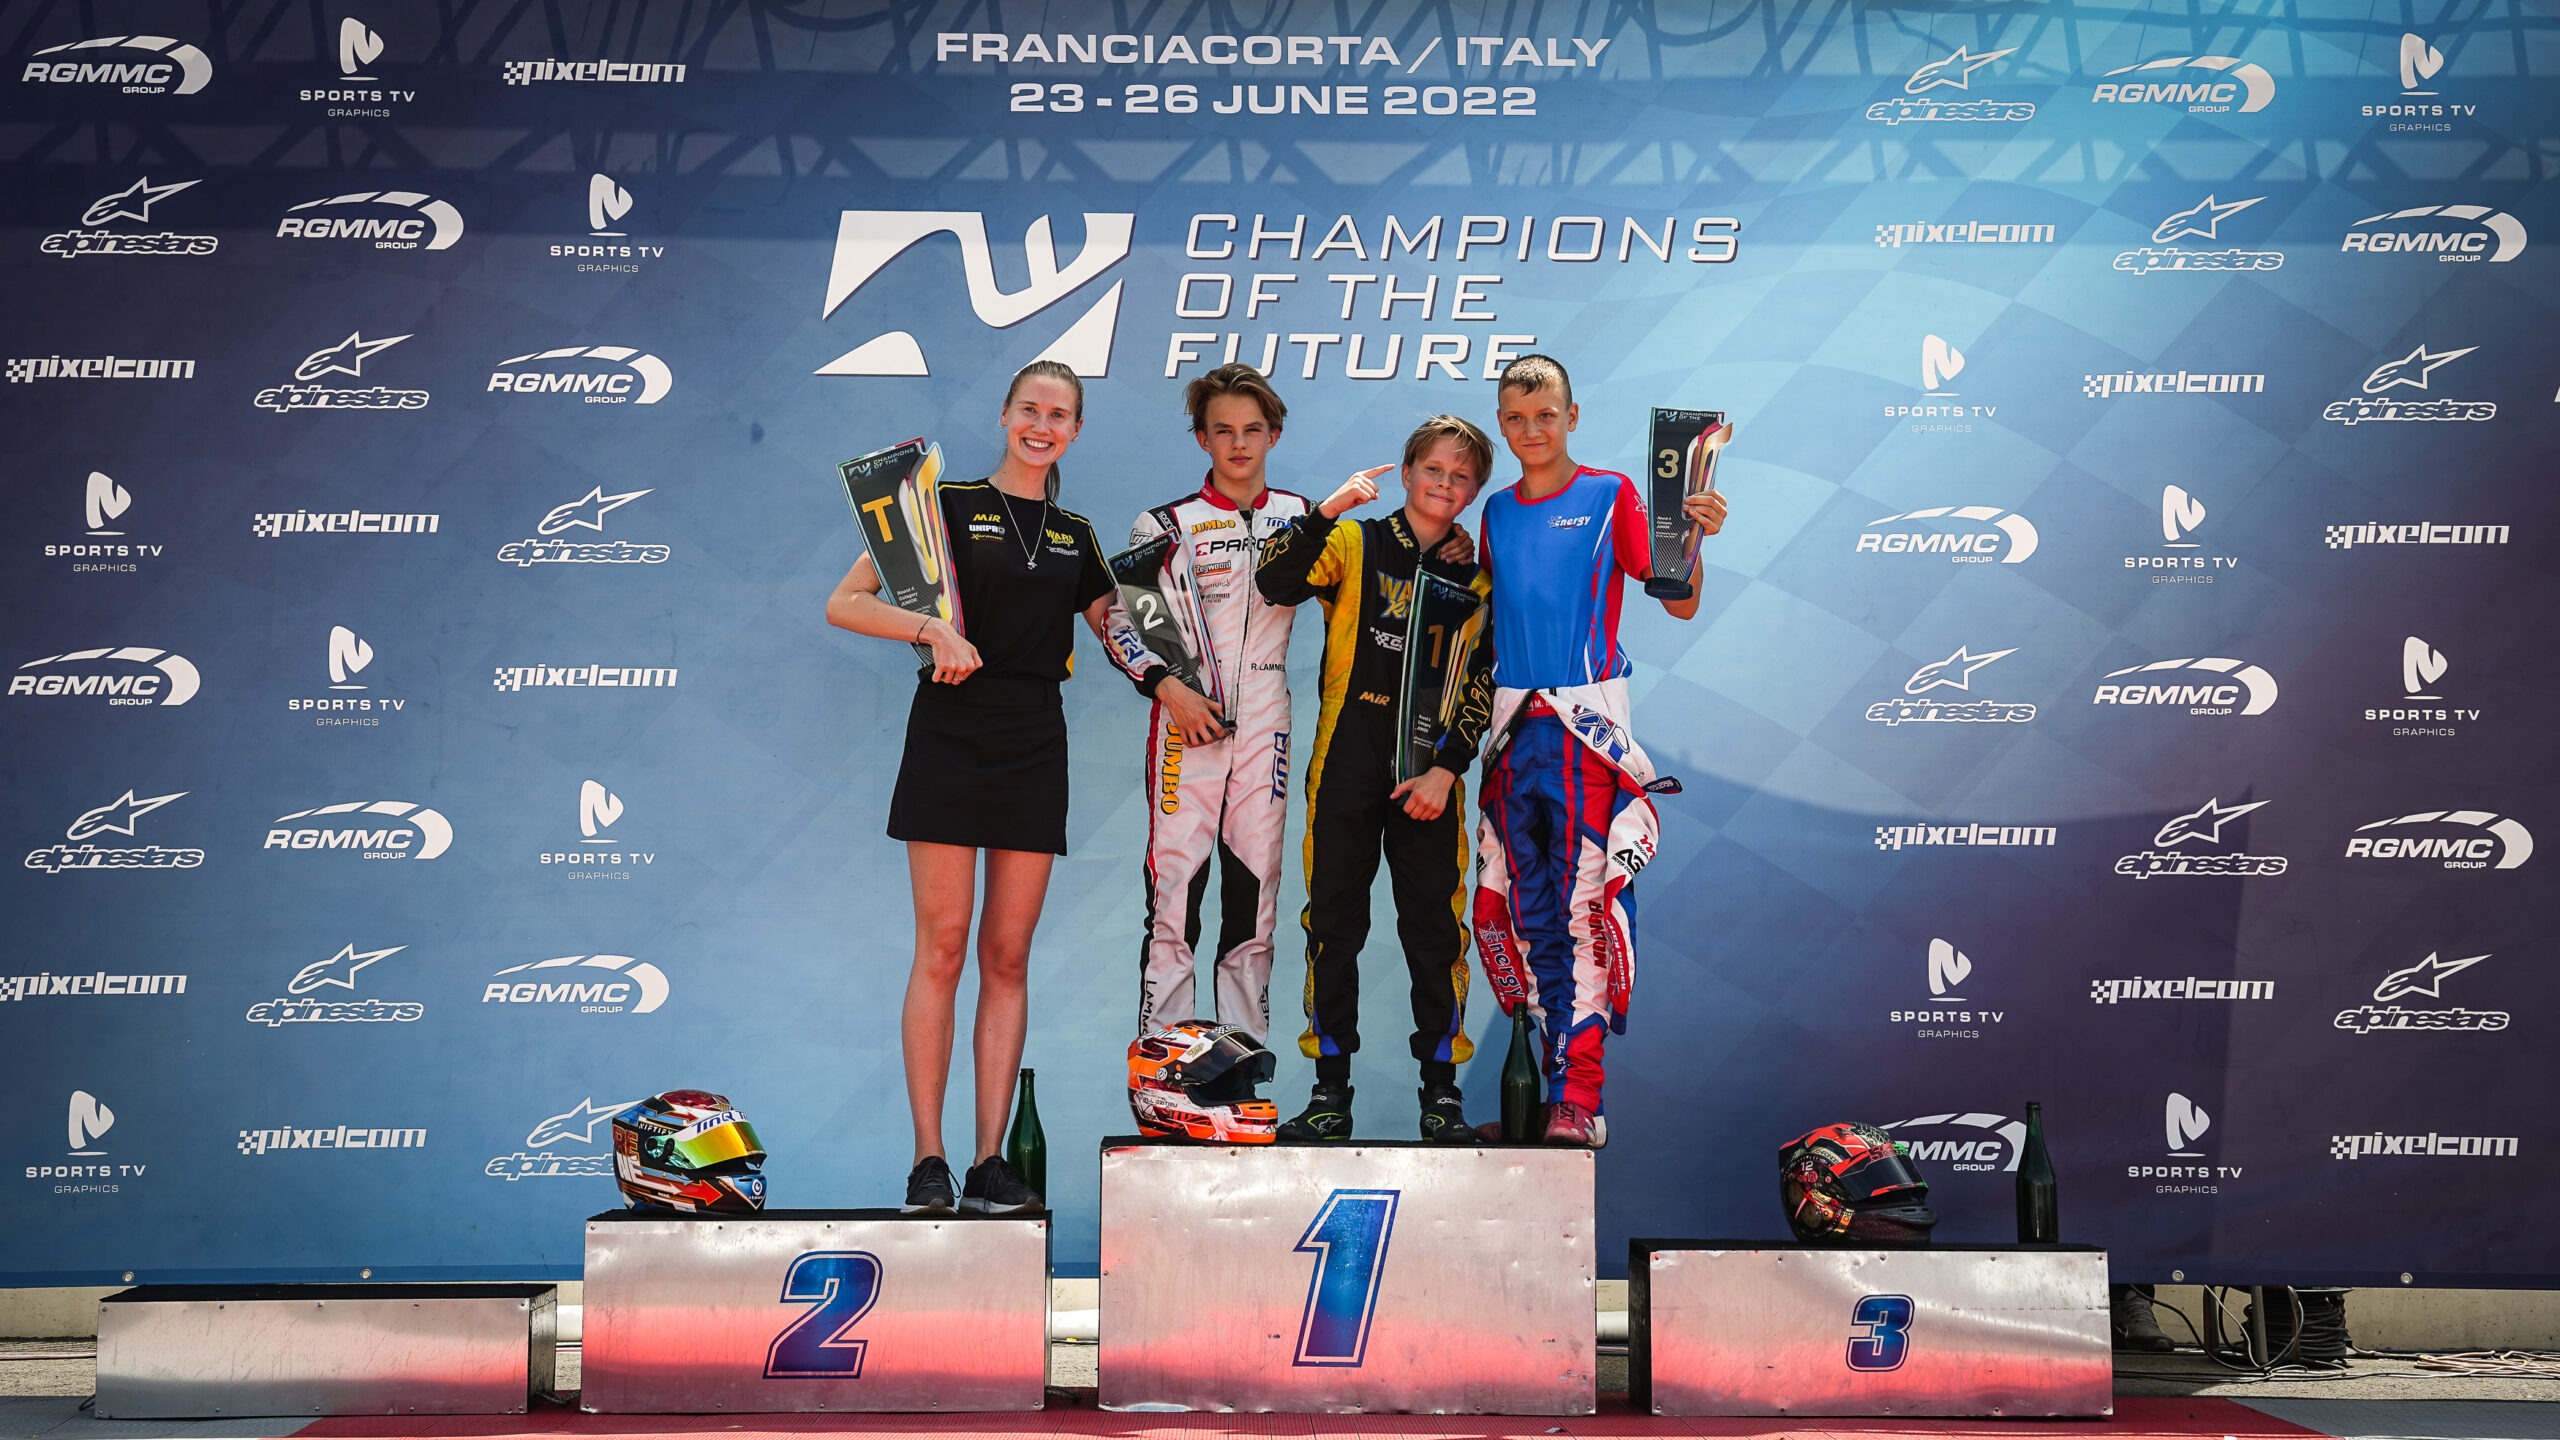 Martin Molnár claims the first ever podium finish for Hungary in karting Euro Series